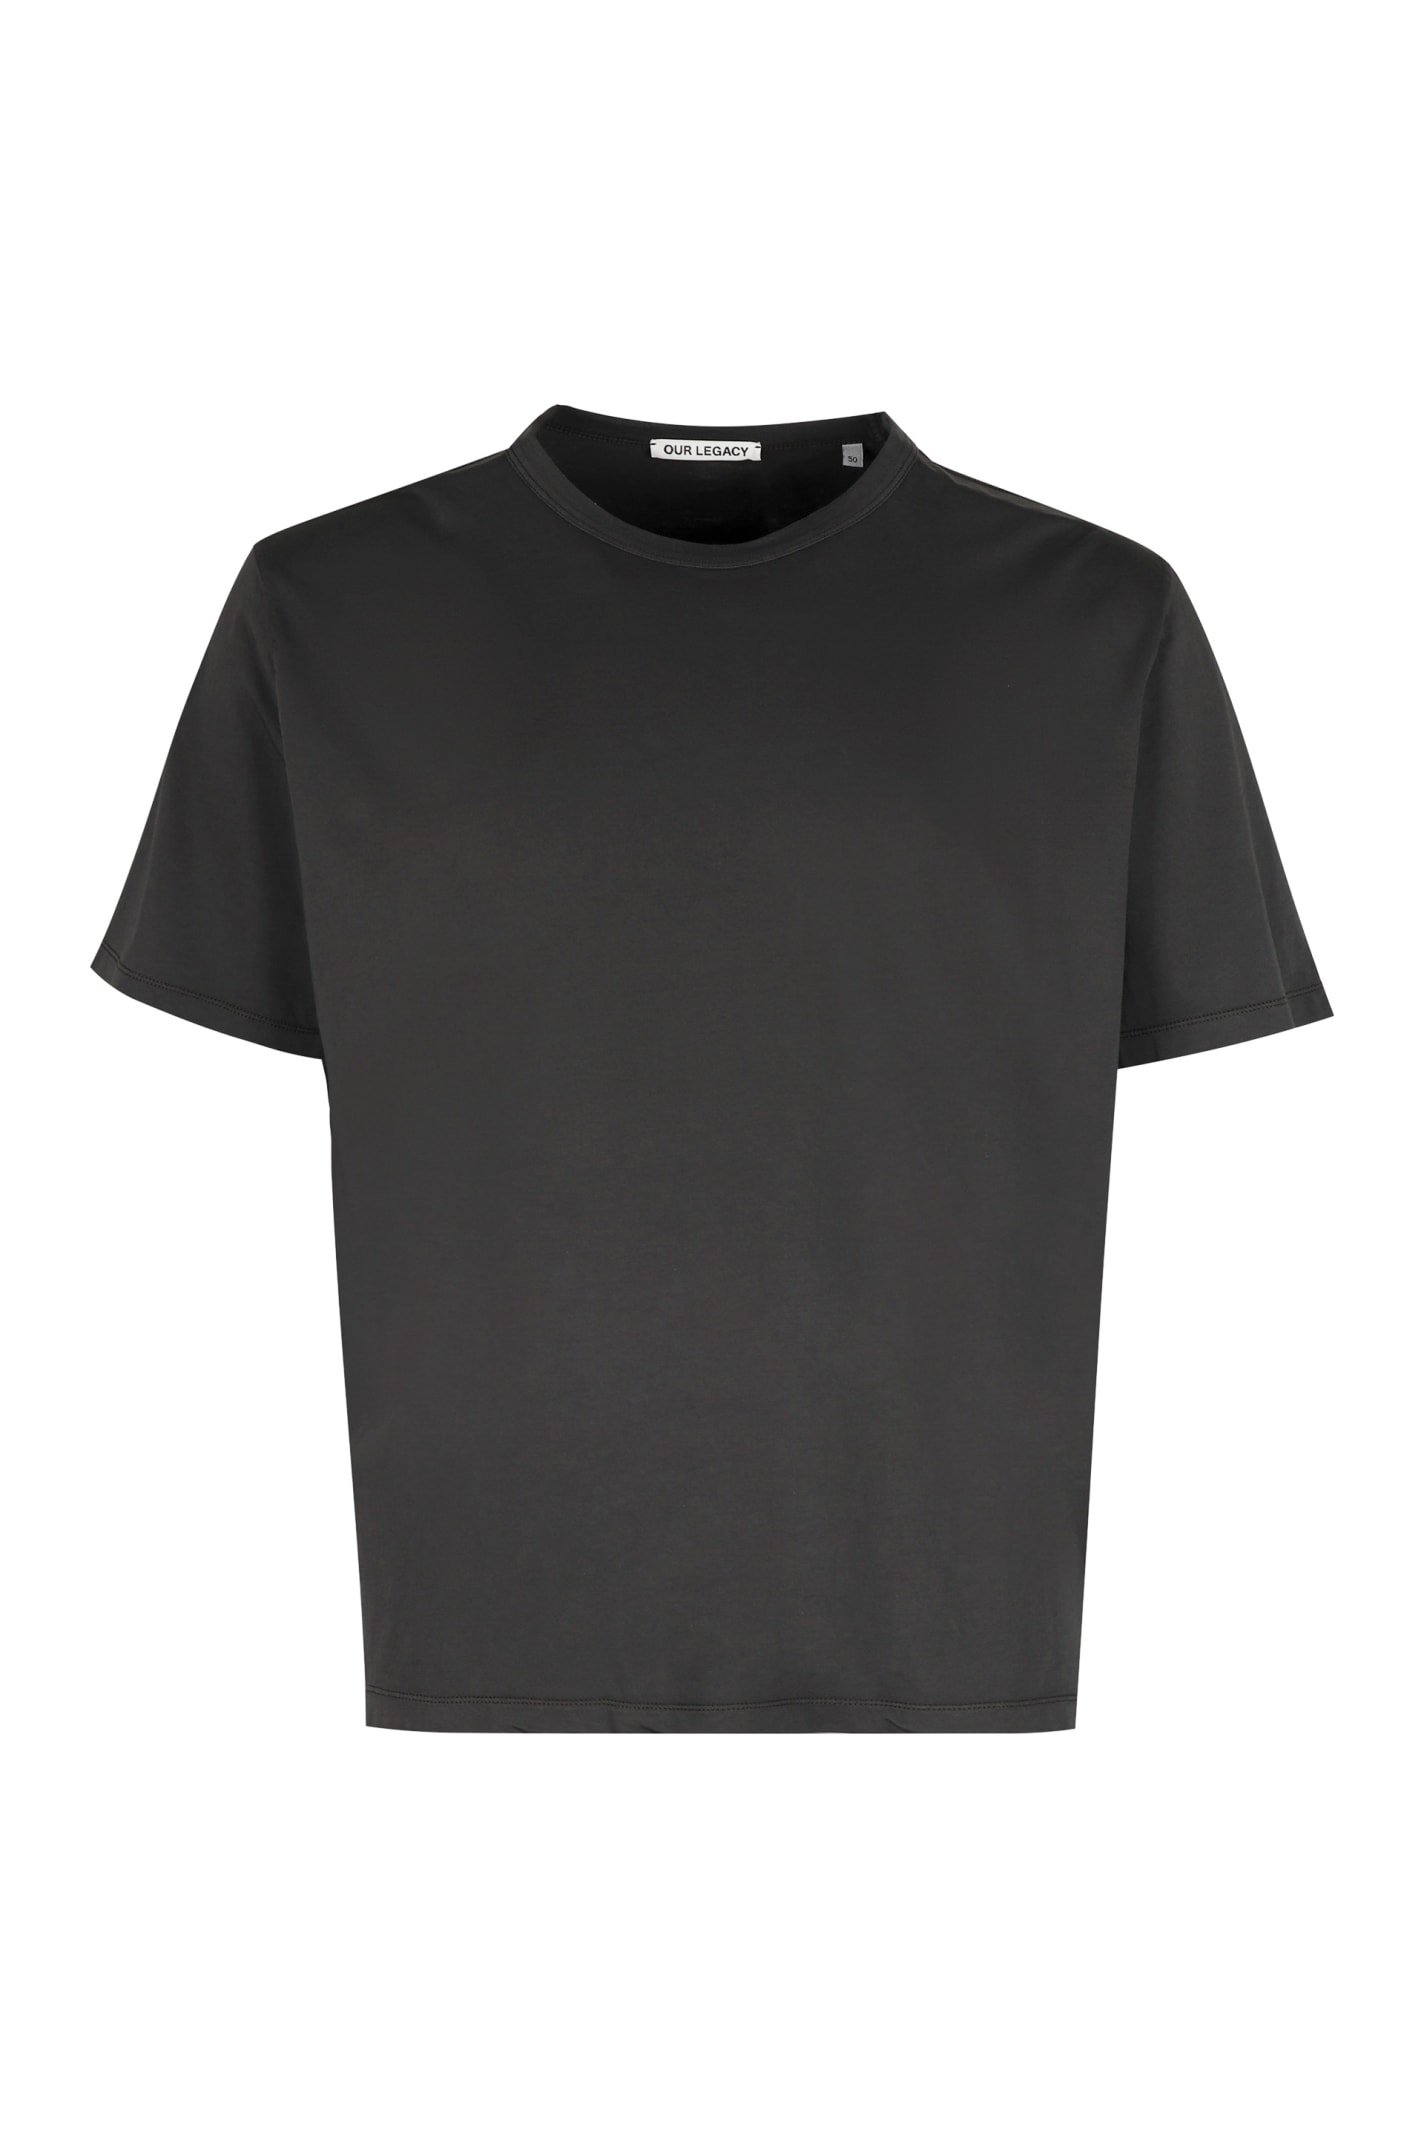 Our Legacy New Box Cotton Crew-neck T-shirt